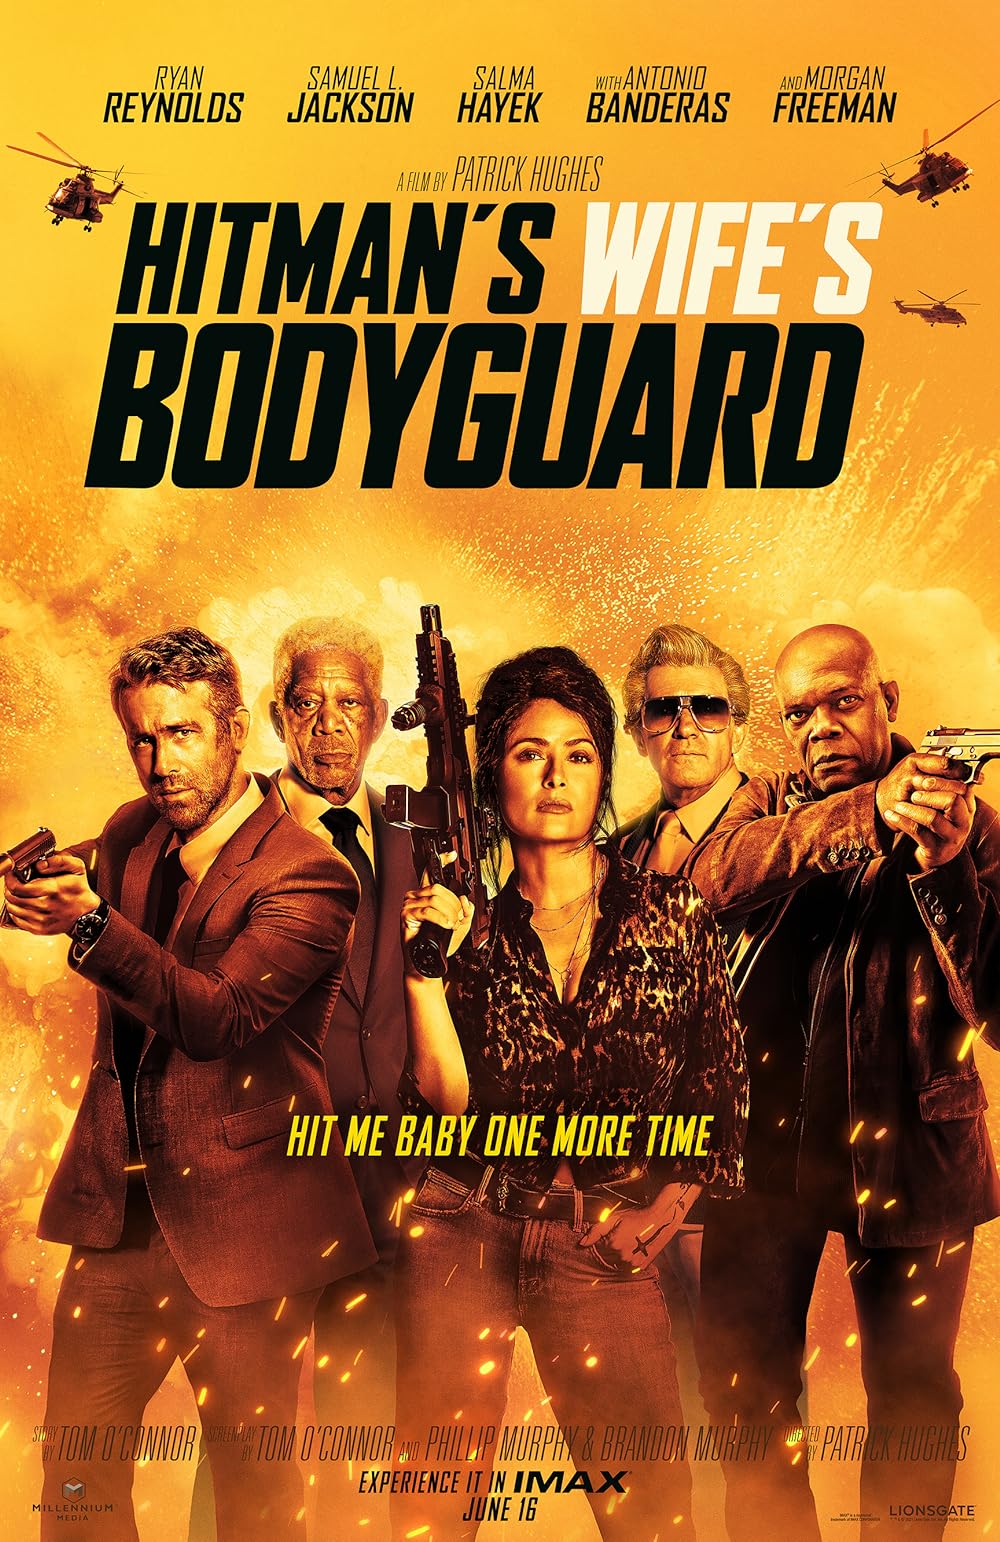 the hitmans wifes bodyguard release date in india